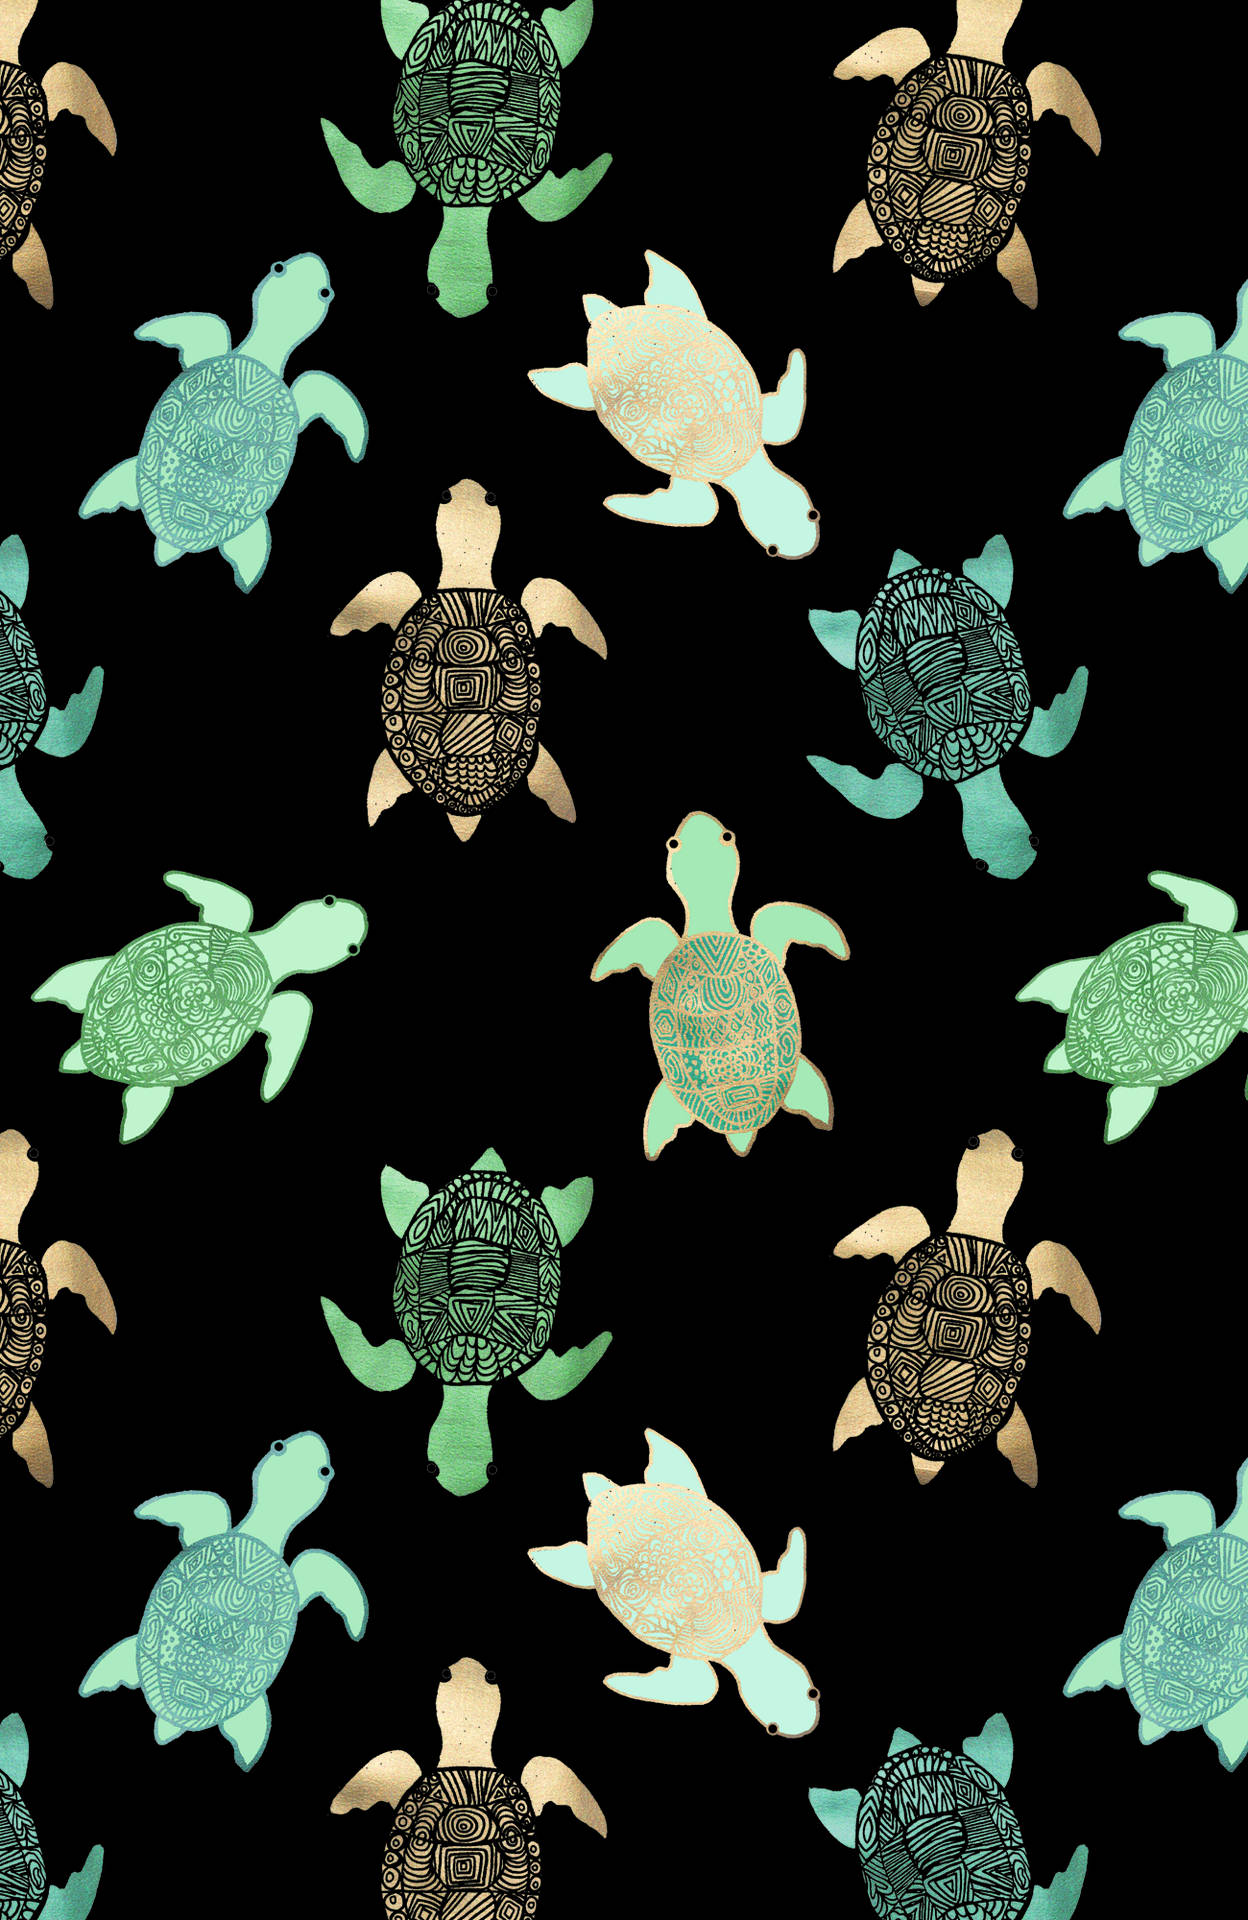 Adorable Aesthetic Turtle Basking in Natural Serenity Wallpaper